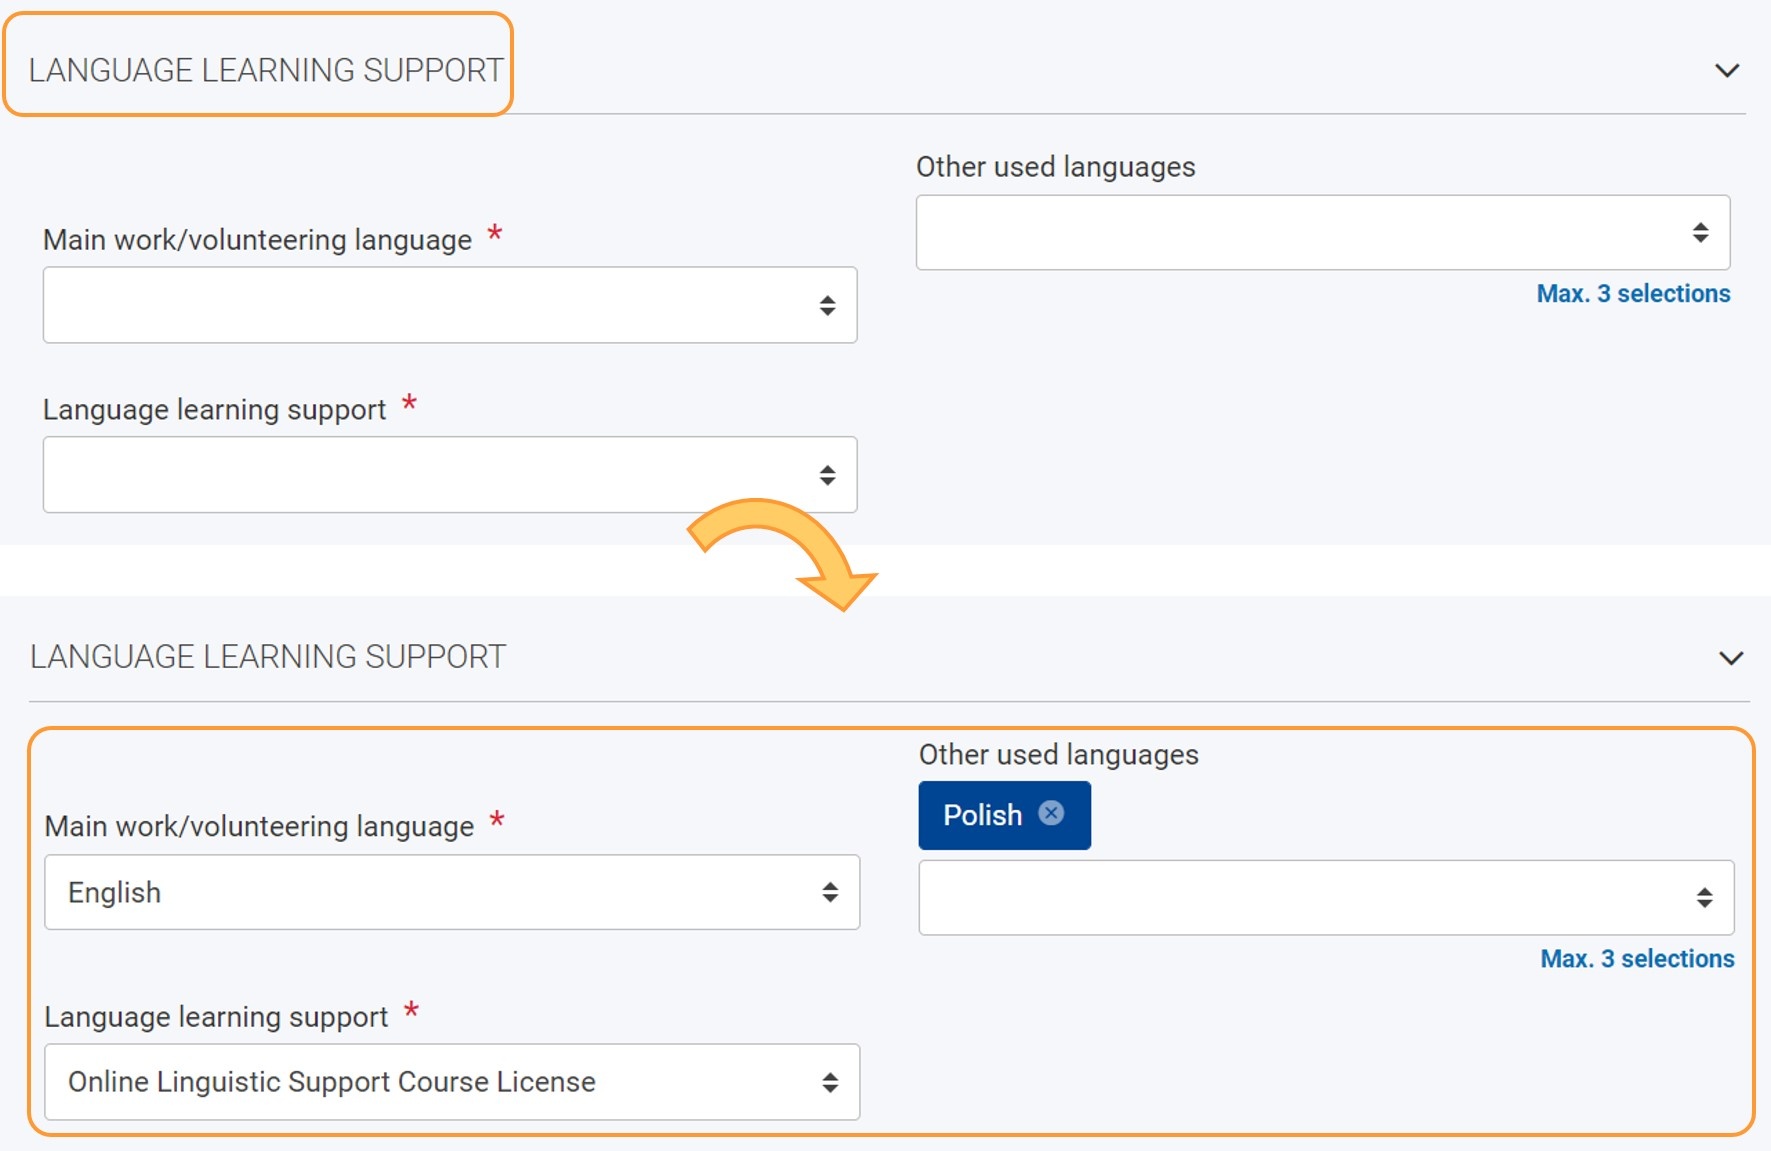 Example of Language Learning Support section